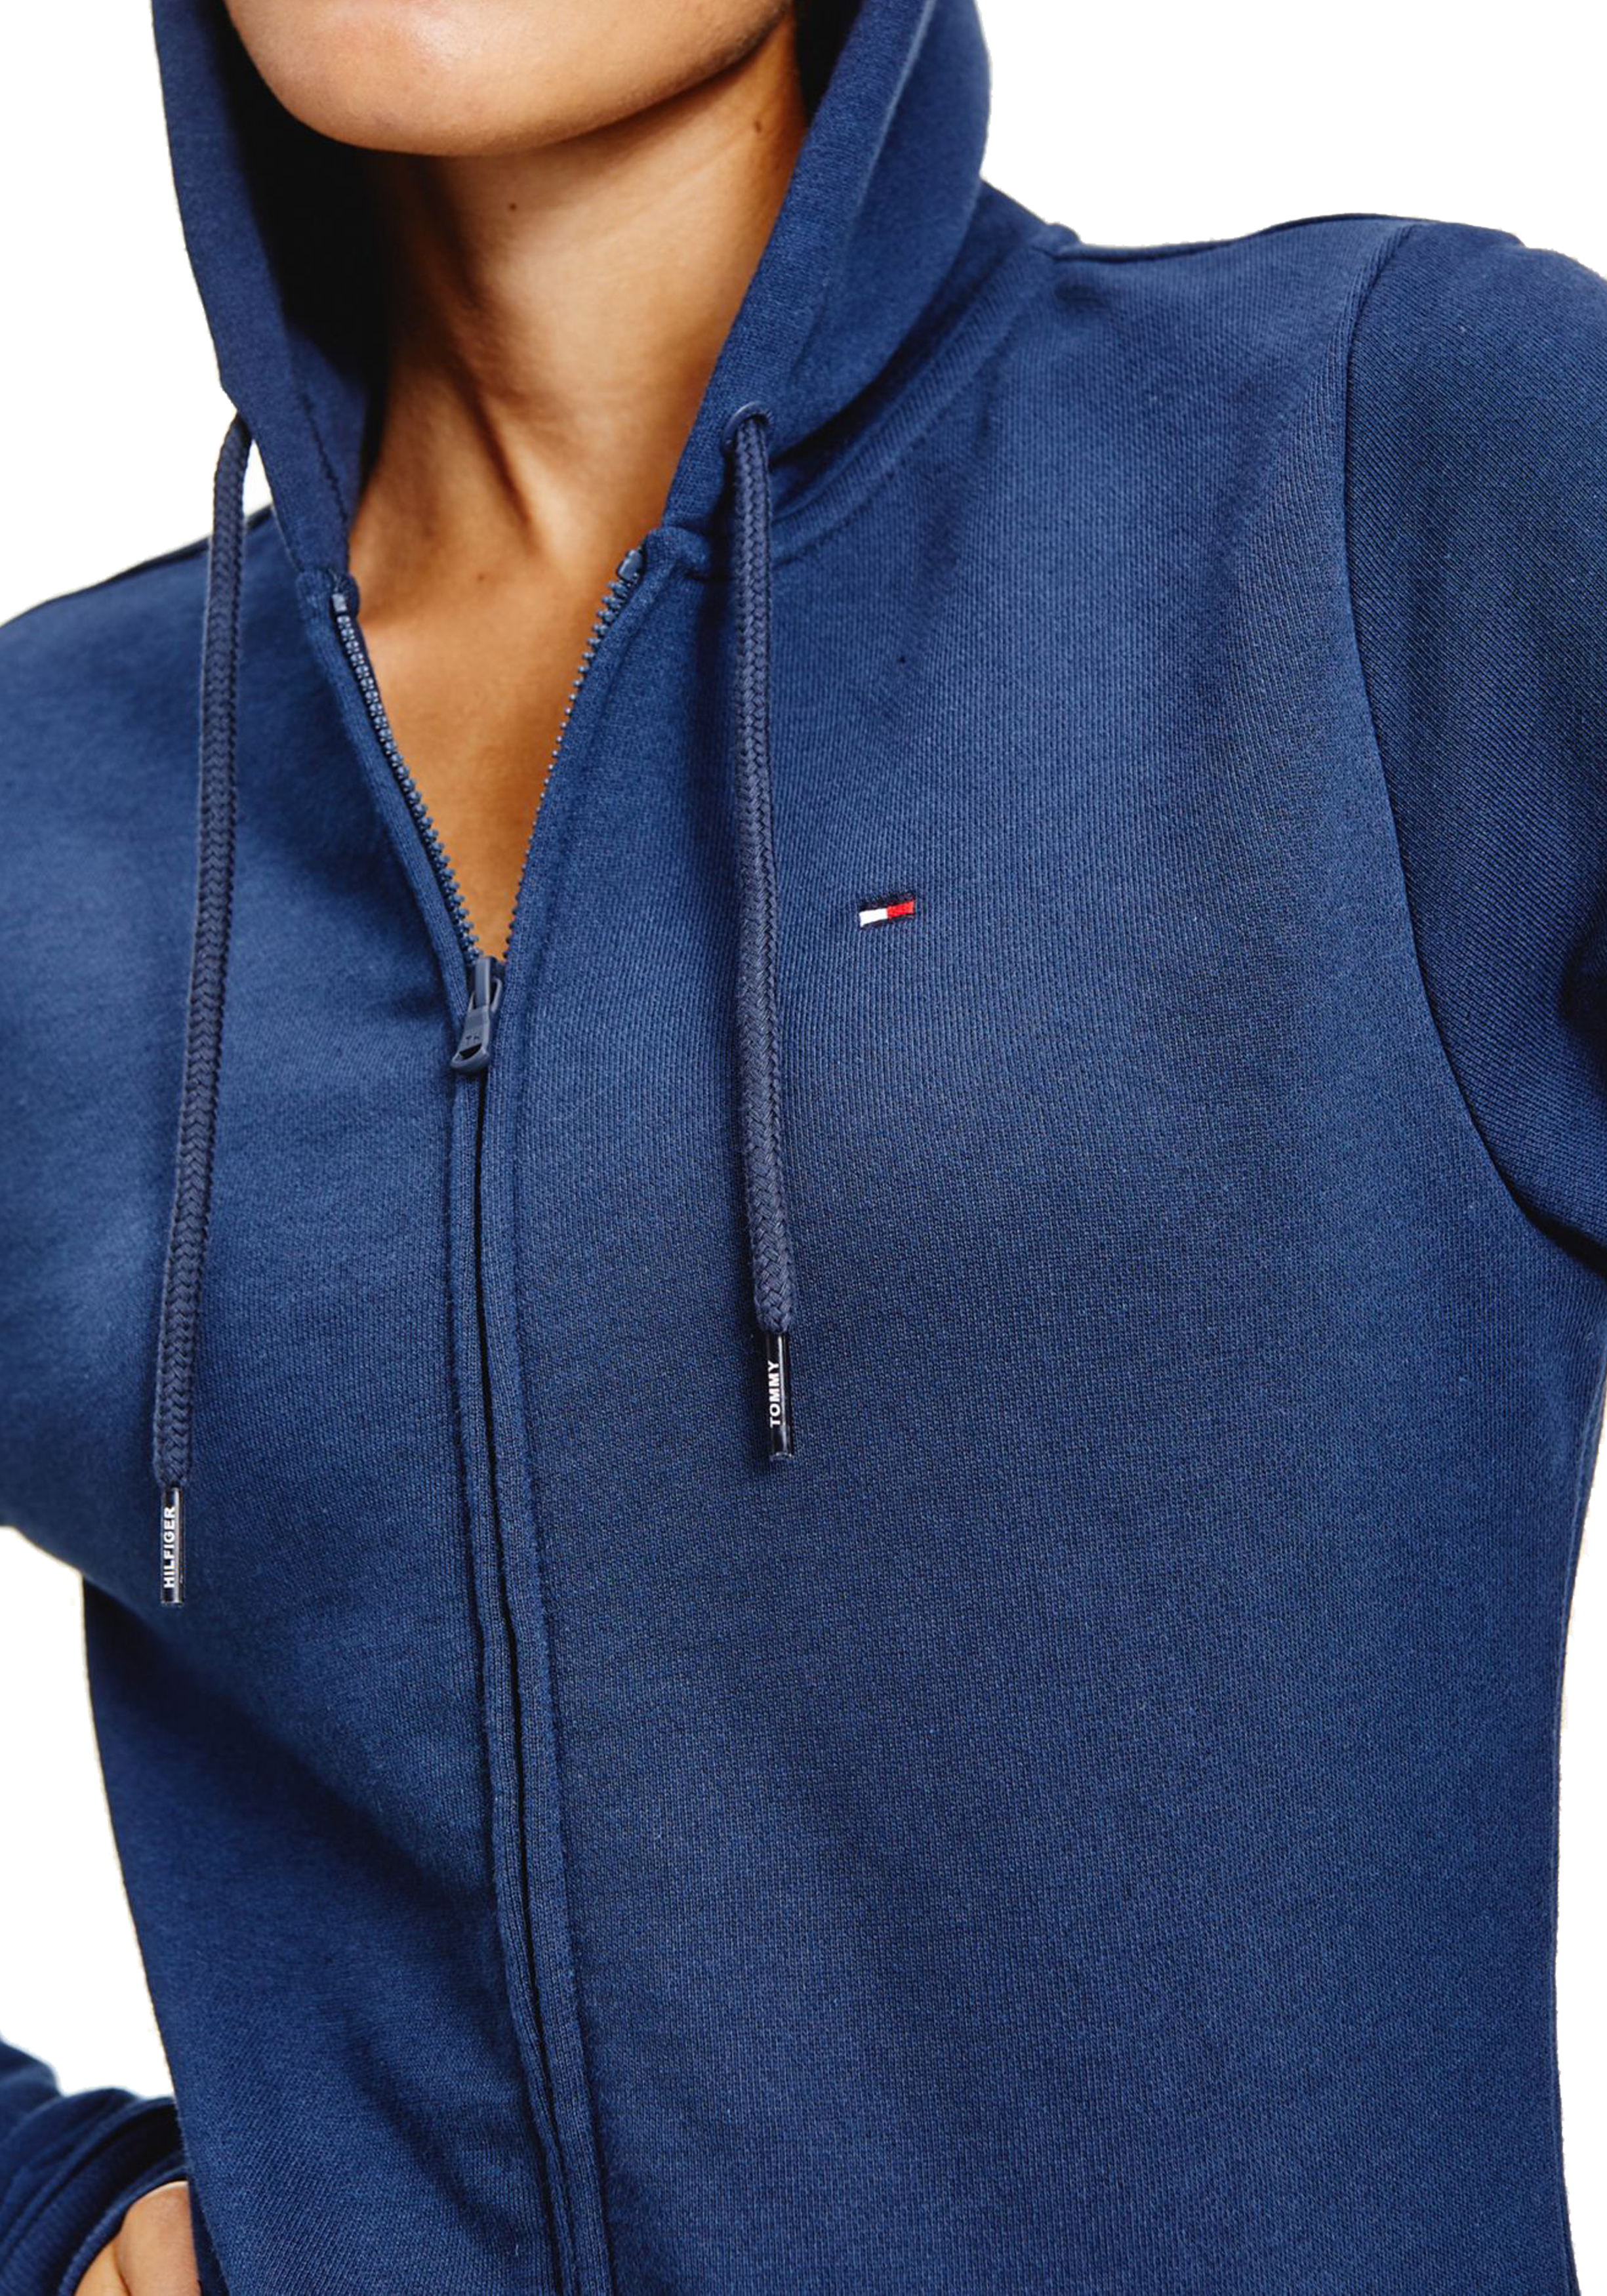 sigaret Extreme armoede Anoniem Tommy Hilfiger dames Authentic hoodie, sweatvest met capuchon,... - Zomer  SALE tot 50% korting